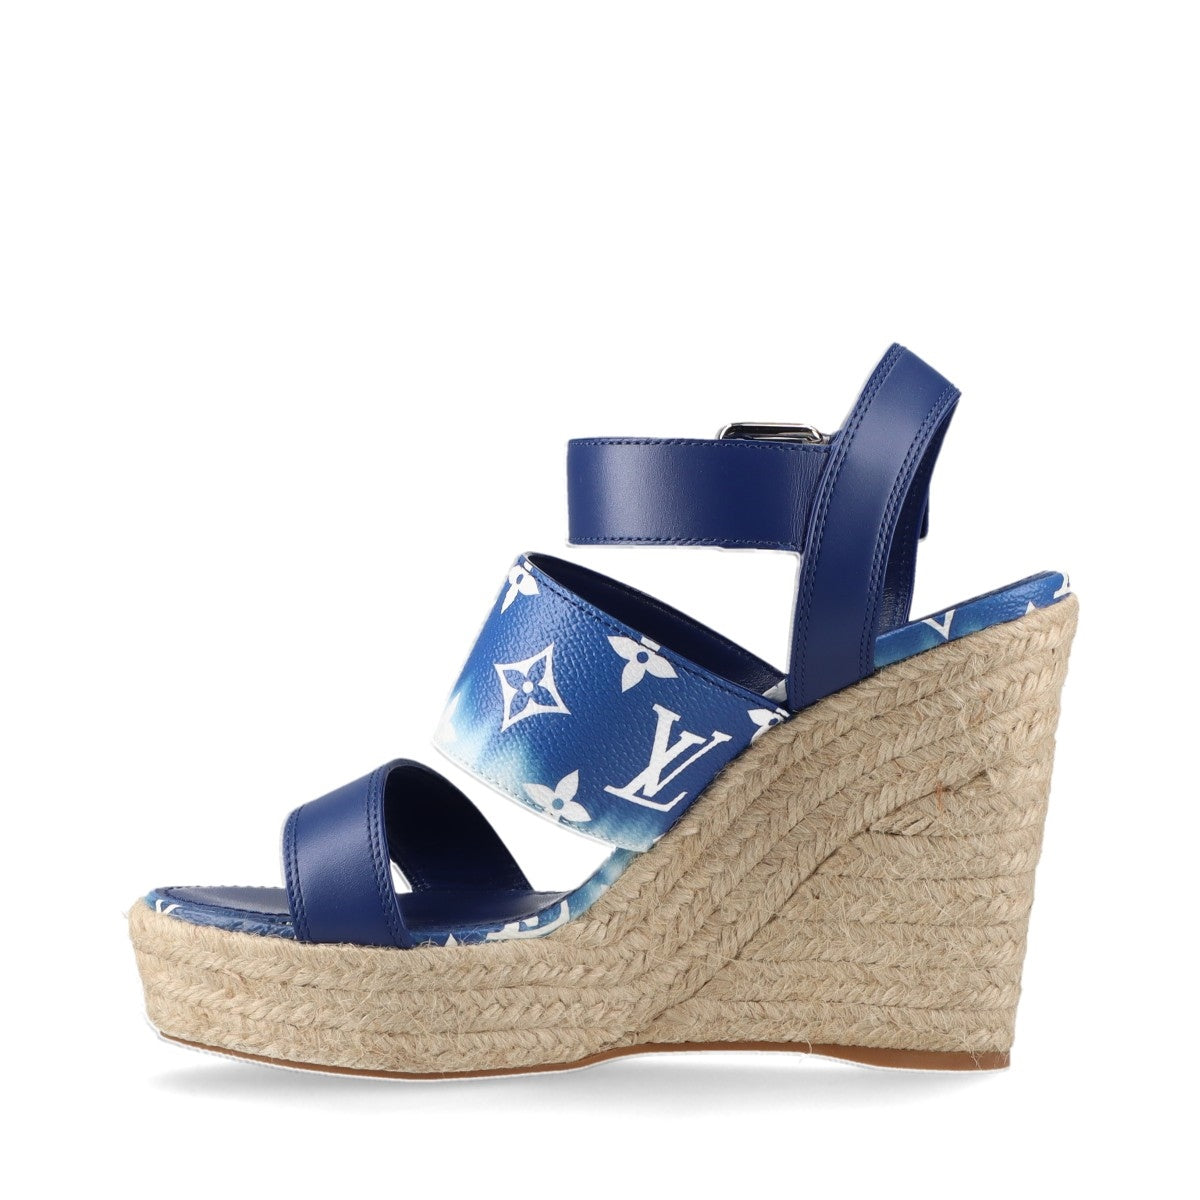 Louis Vuitton Starboard line 20 years PVC & leather Wedge Sole Sandals EU38 Ladies' Blue x white CL0210 Monogram escal There is a bag